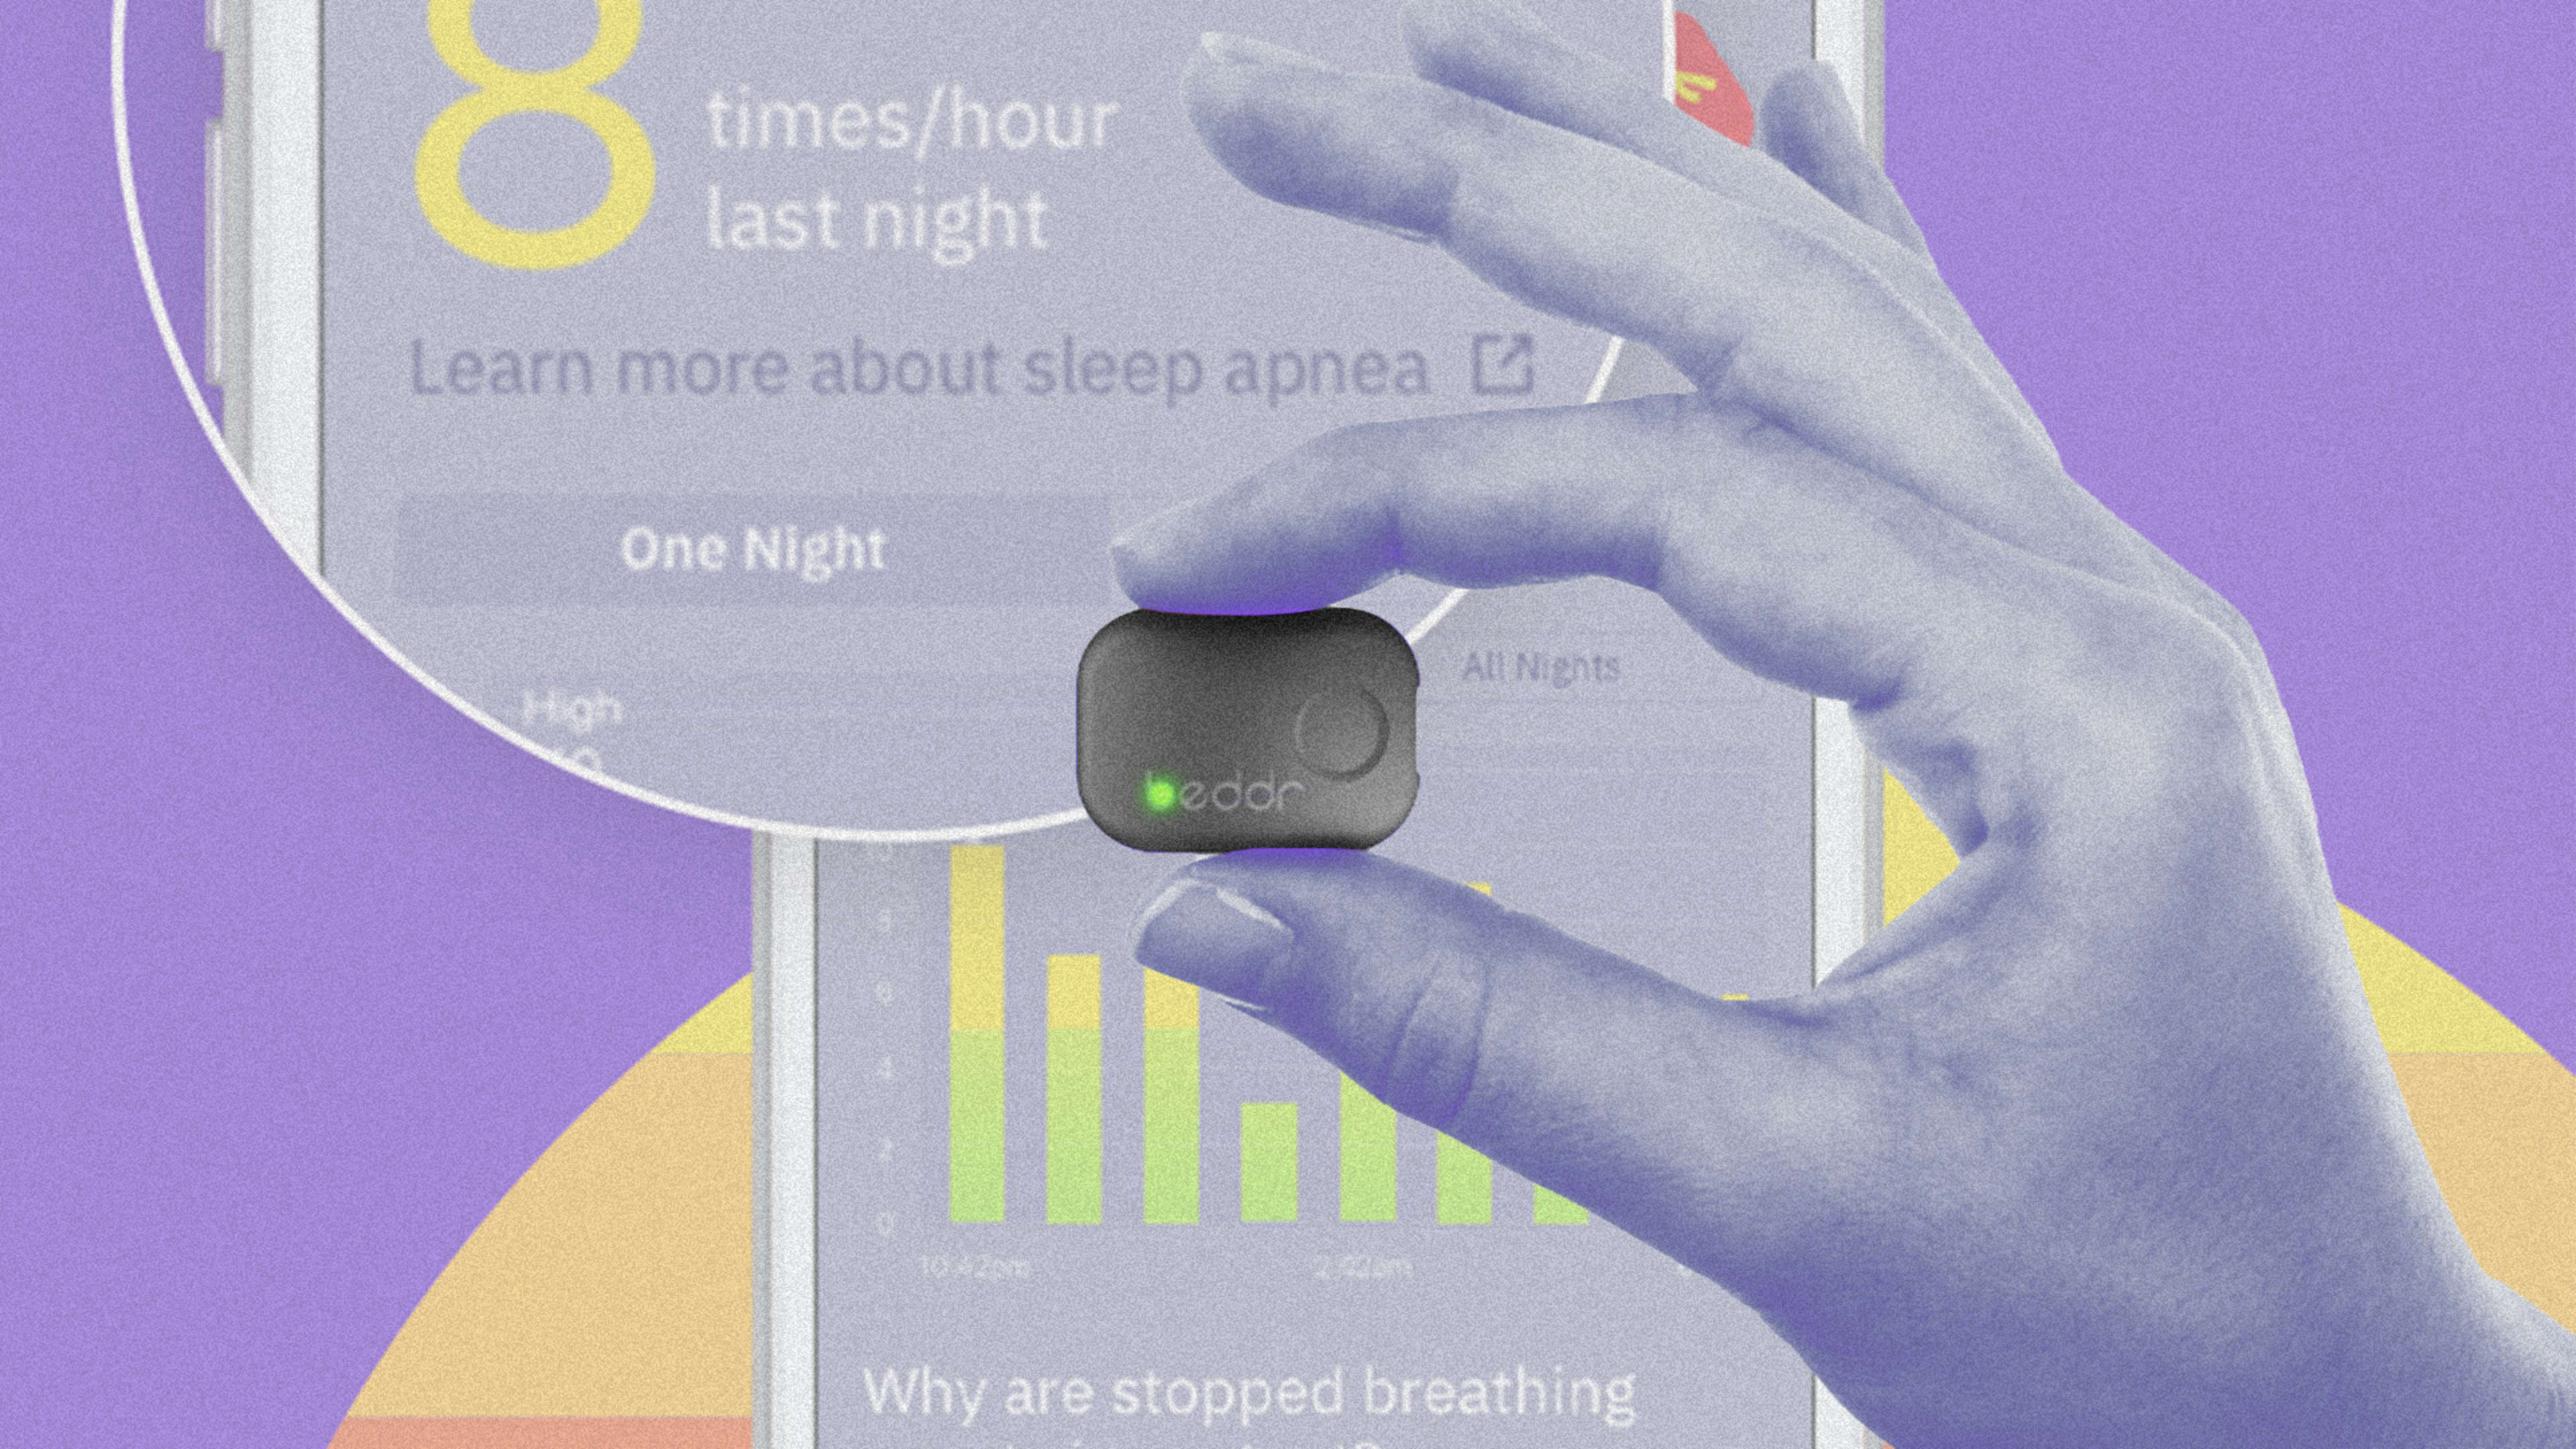 This tiny wearable sticks to your forehead to measure your sleep